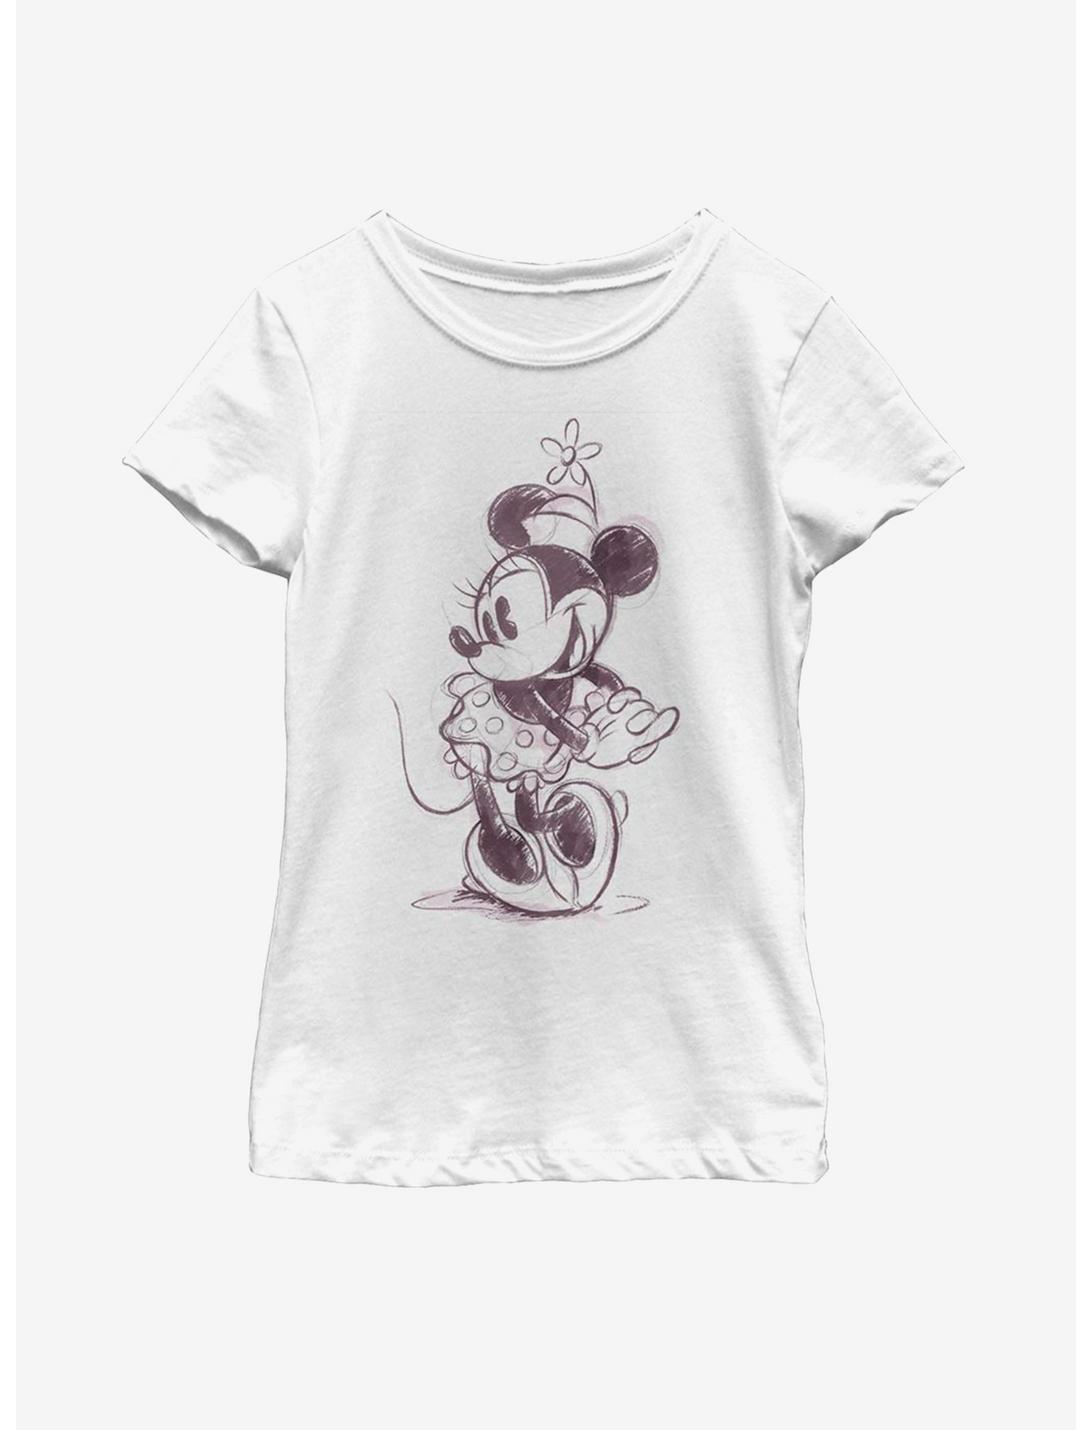 Disney Mickey Mouse Sketchy Minnie Youth Girls T-Shirt, WHITE, hi-res